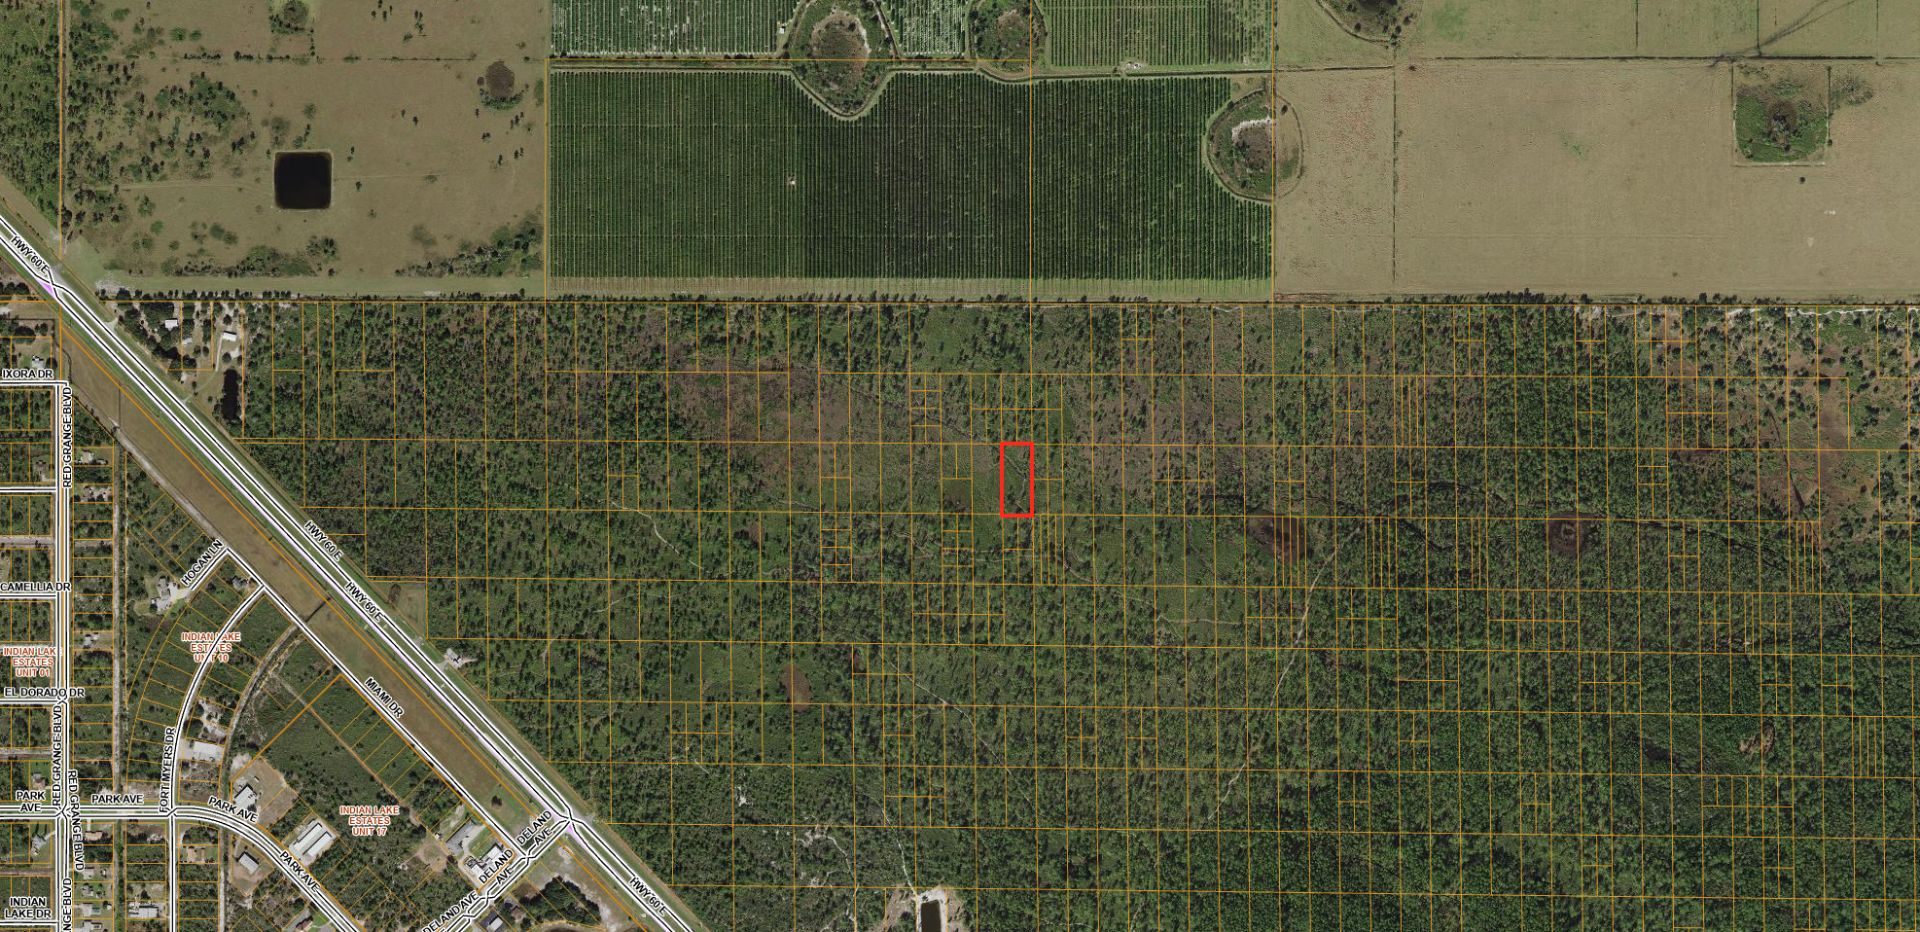 Own Almost 1.45 Acres Surrounded by Lakes in Sunny Florida! - Image 4 of 10